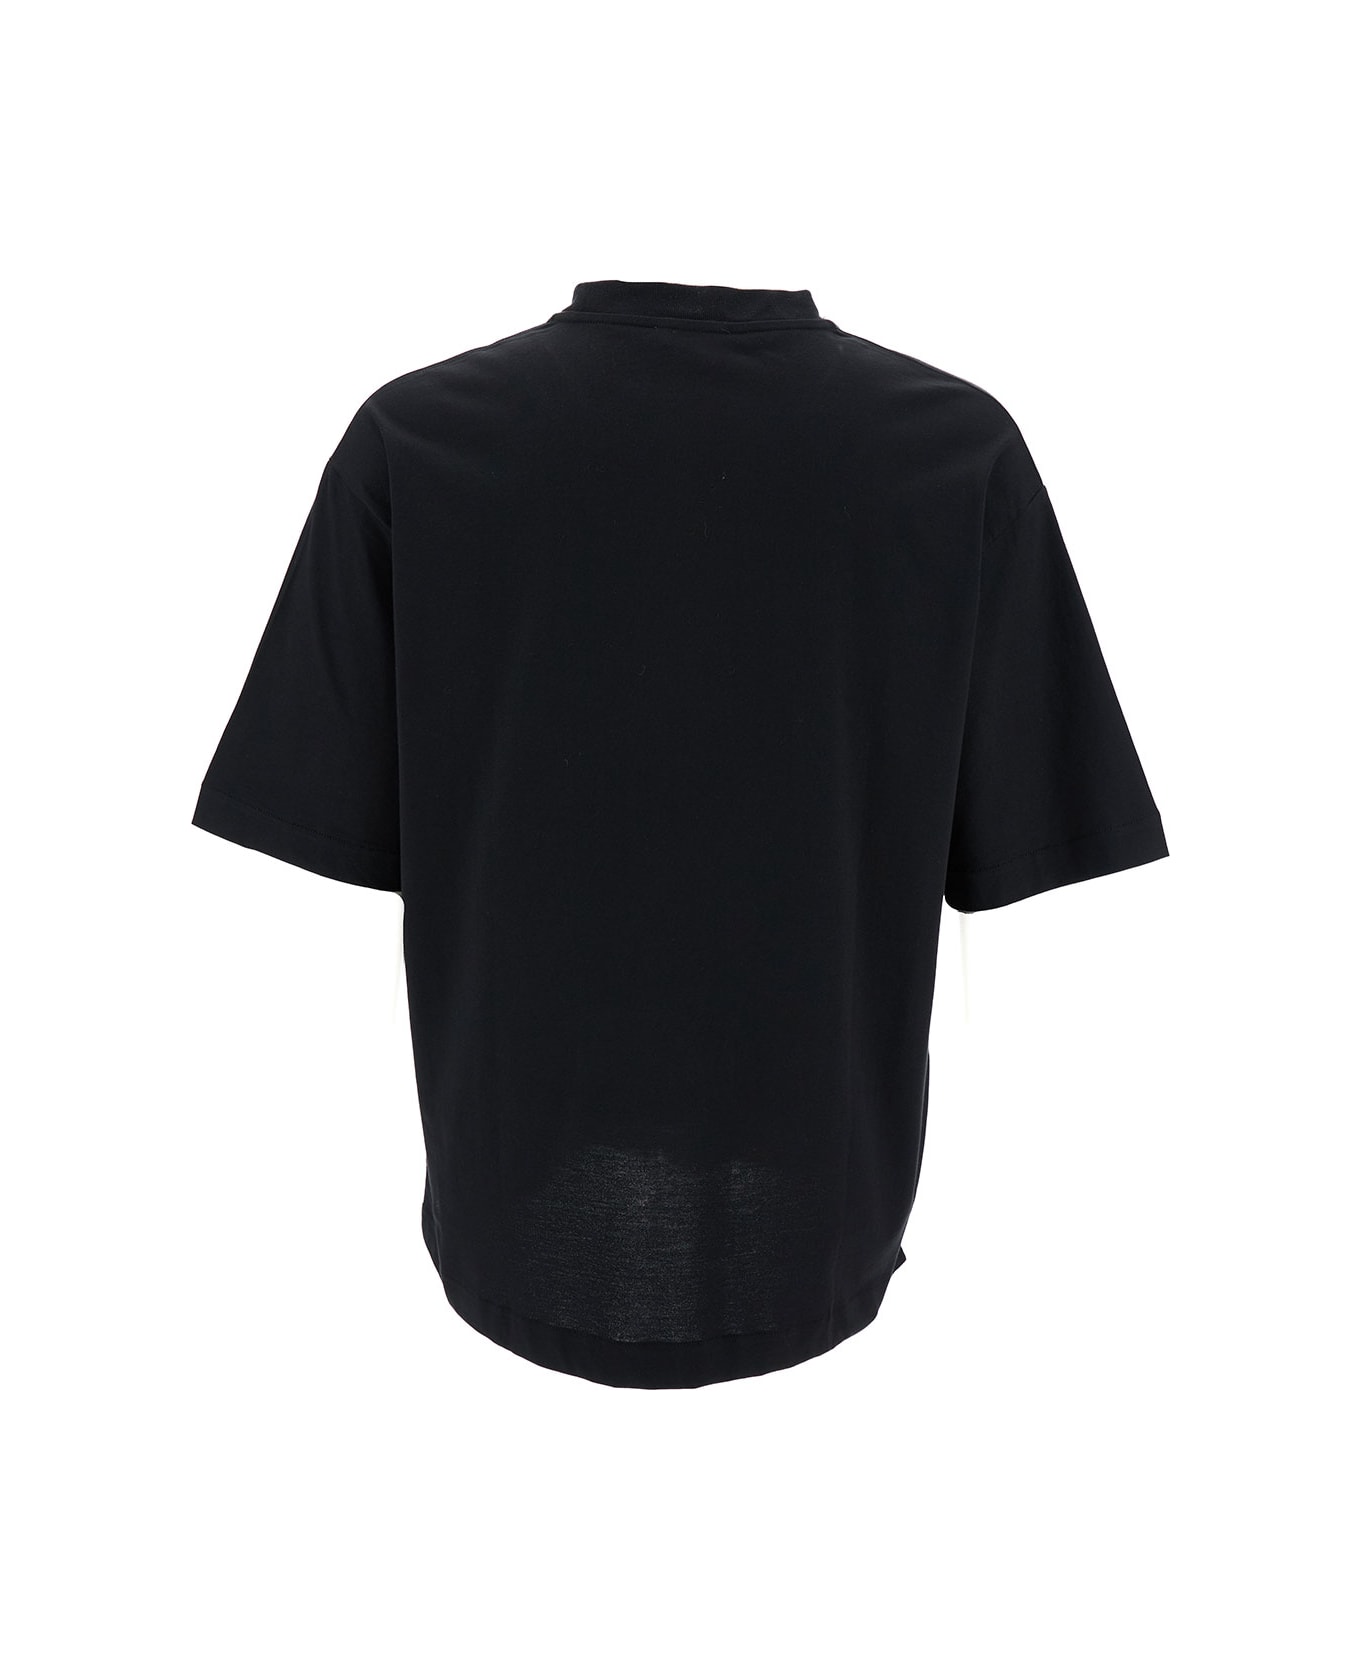 Off-White Crewneck T-shirt With Tonal Embroidery - Black シャツ